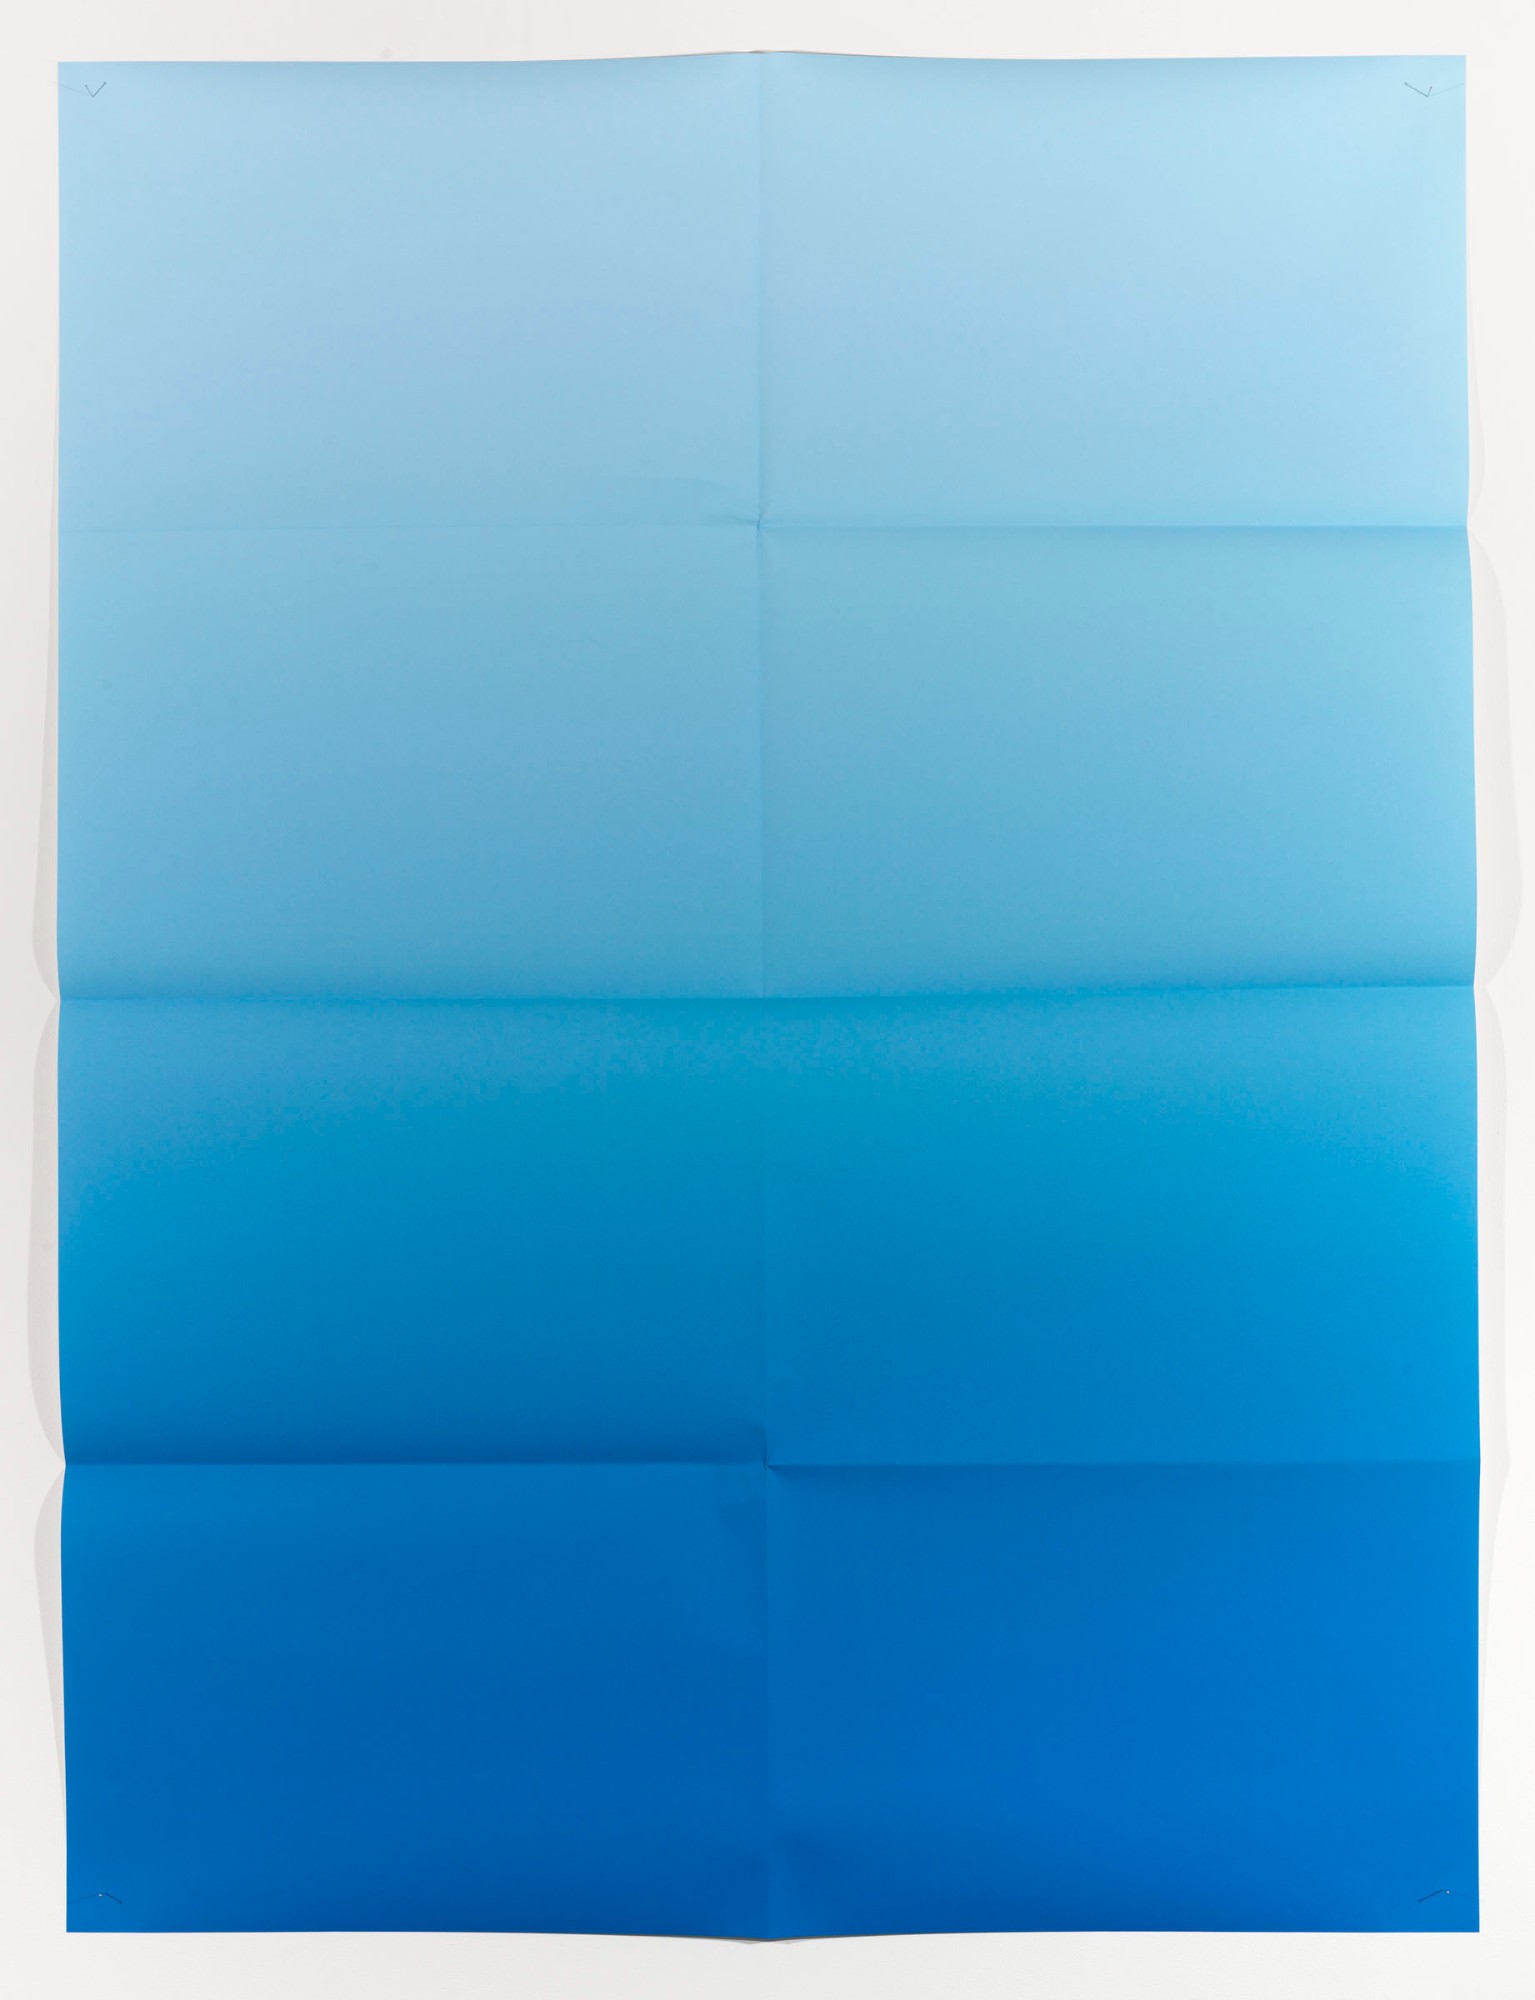 Jack Pierson, Or for mercy, folded pigment print, 210,8 x 157,5 cm